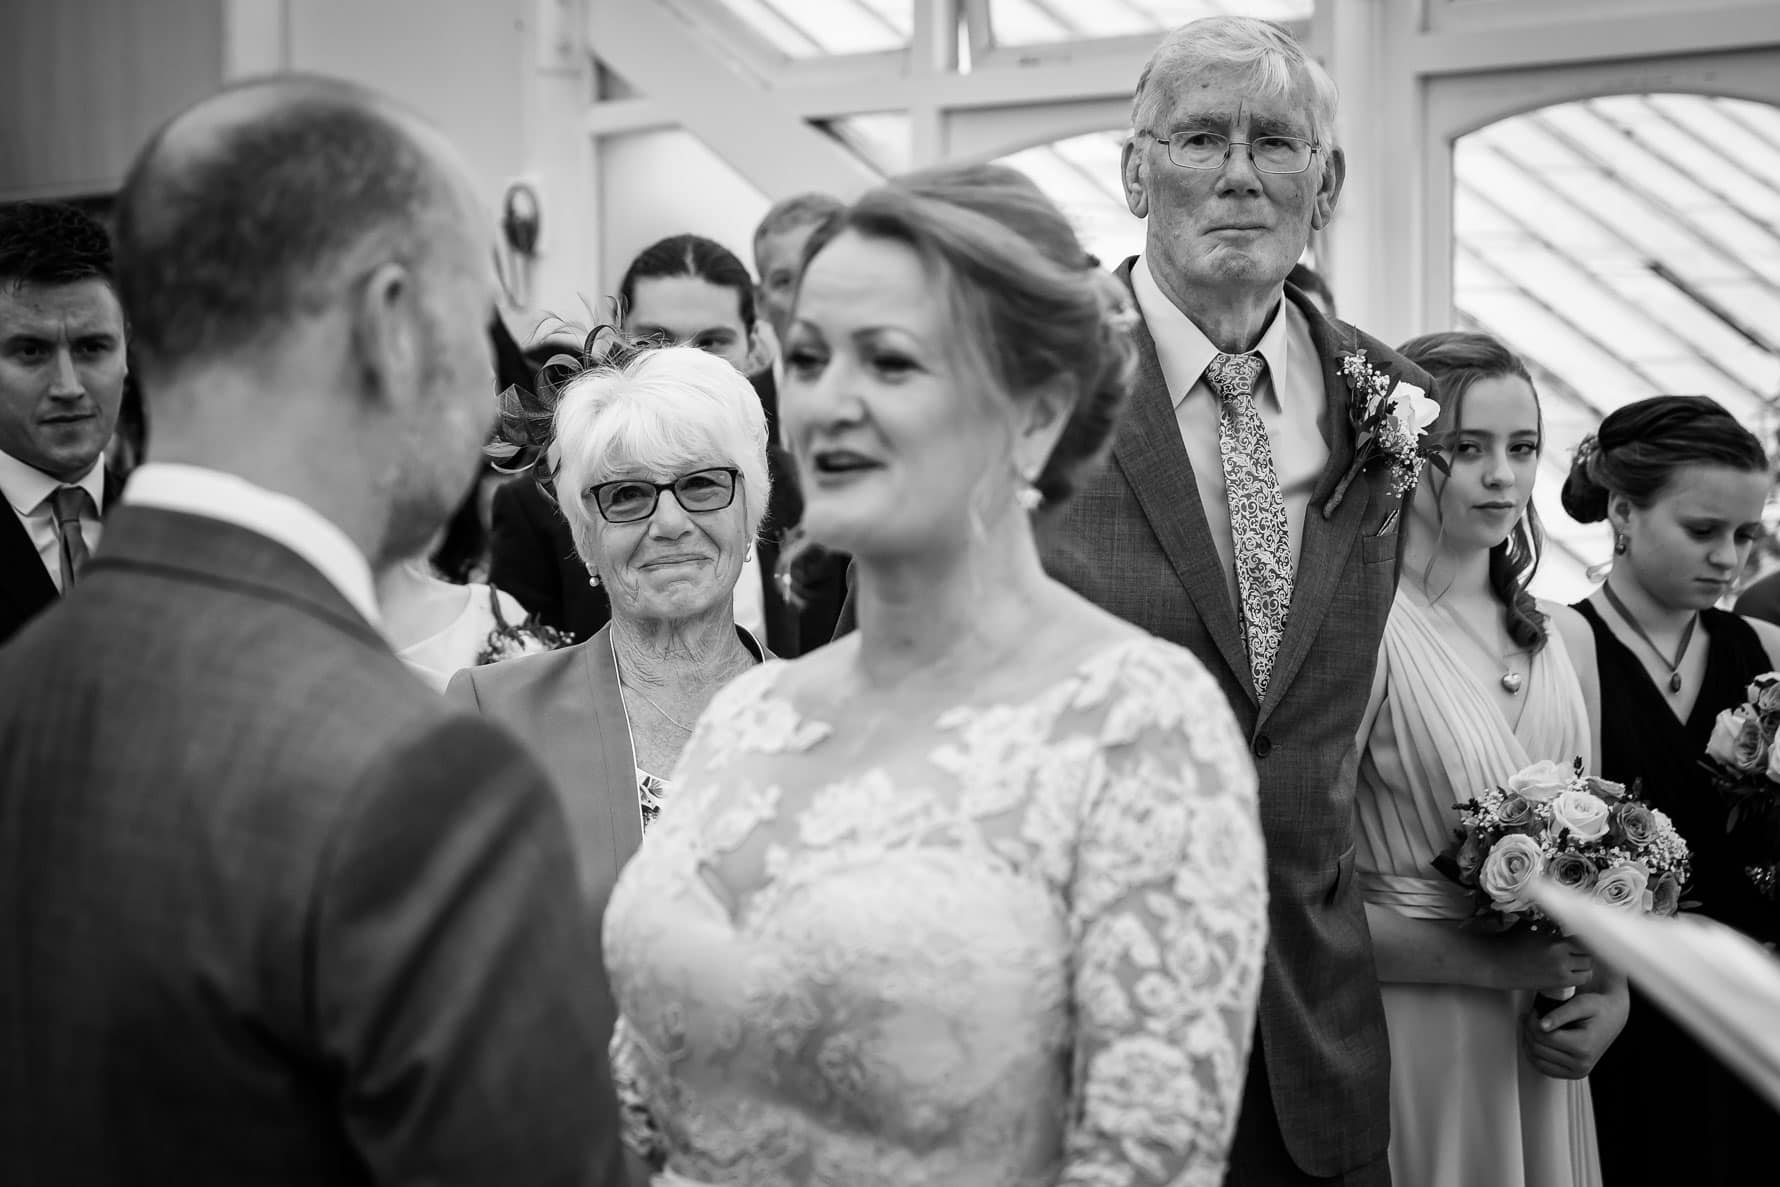 A proud mum looks on during the wedding ceremony at Hanbury Manor